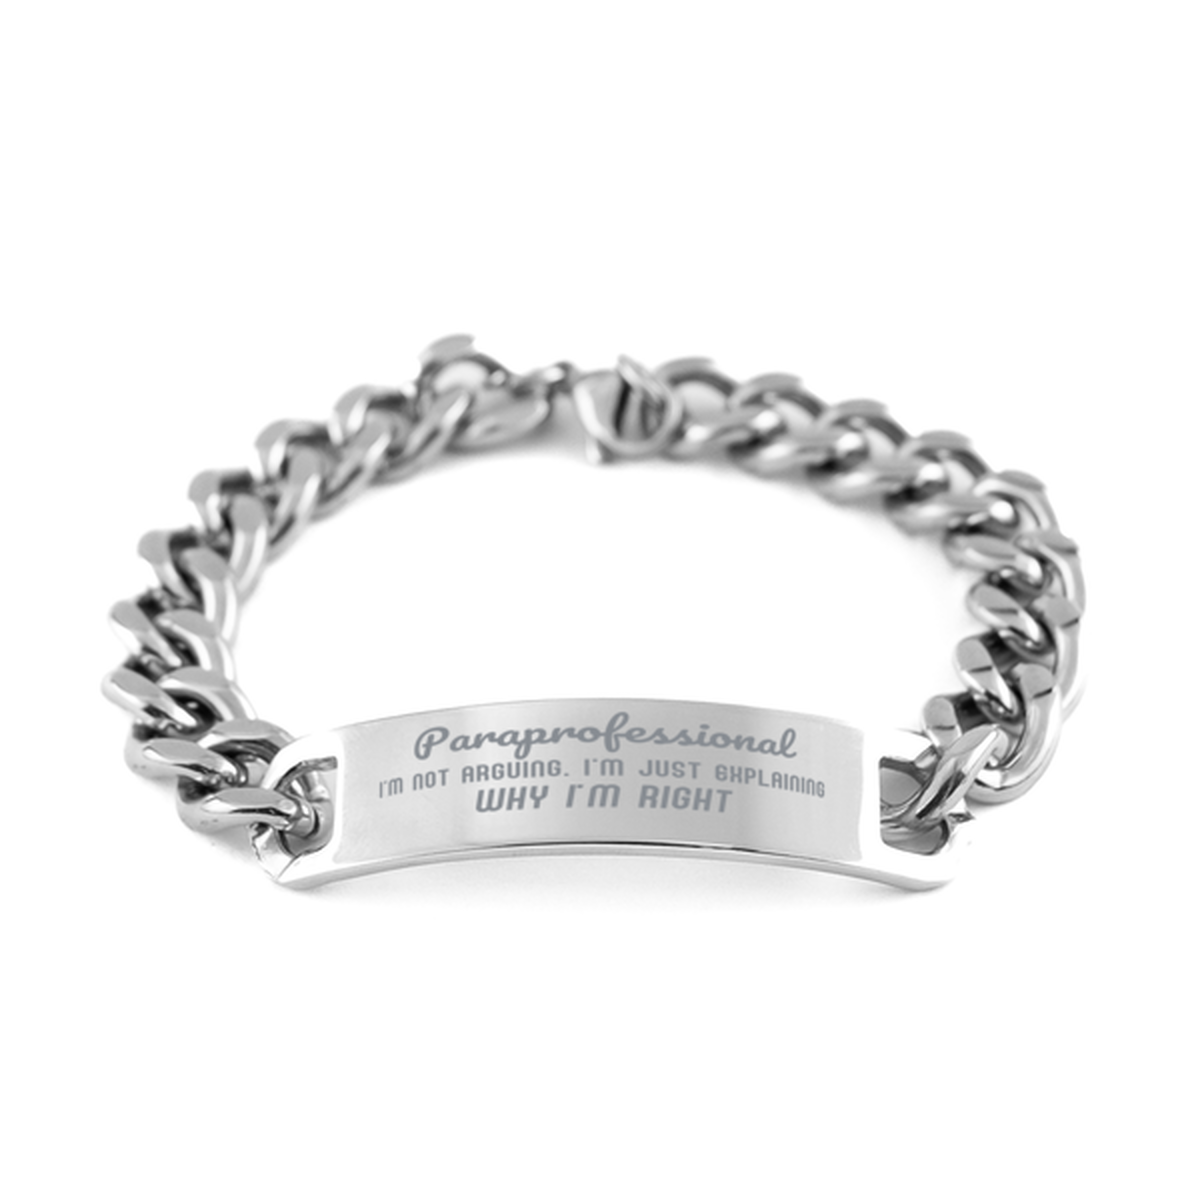 Paraprofessional I'm not Arguing. I'm Just Explaining Why I'm RIGHT Cuban Chain Stainless Steel Bracelet, Graduation Birthday Christmas Paraprofessional Gifts For Paraprofessional Funny Saying Quote Present for Men Women Coworker